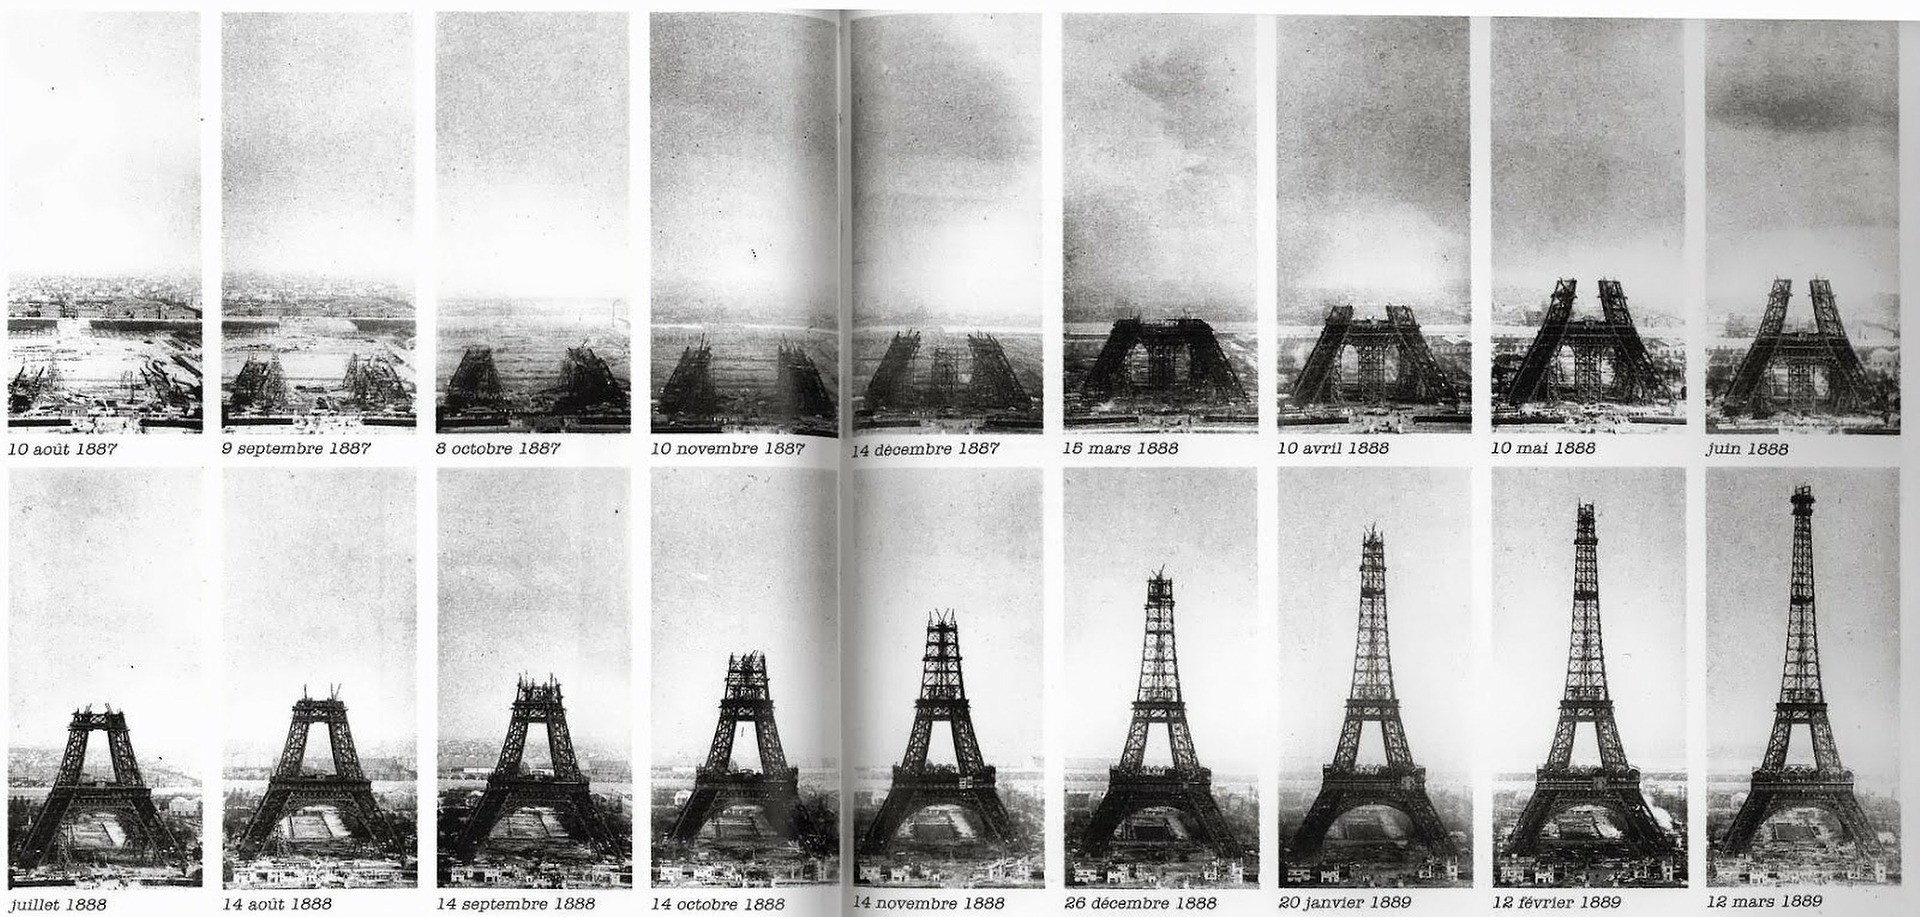 Time series for the construction of the Eiffel Tower